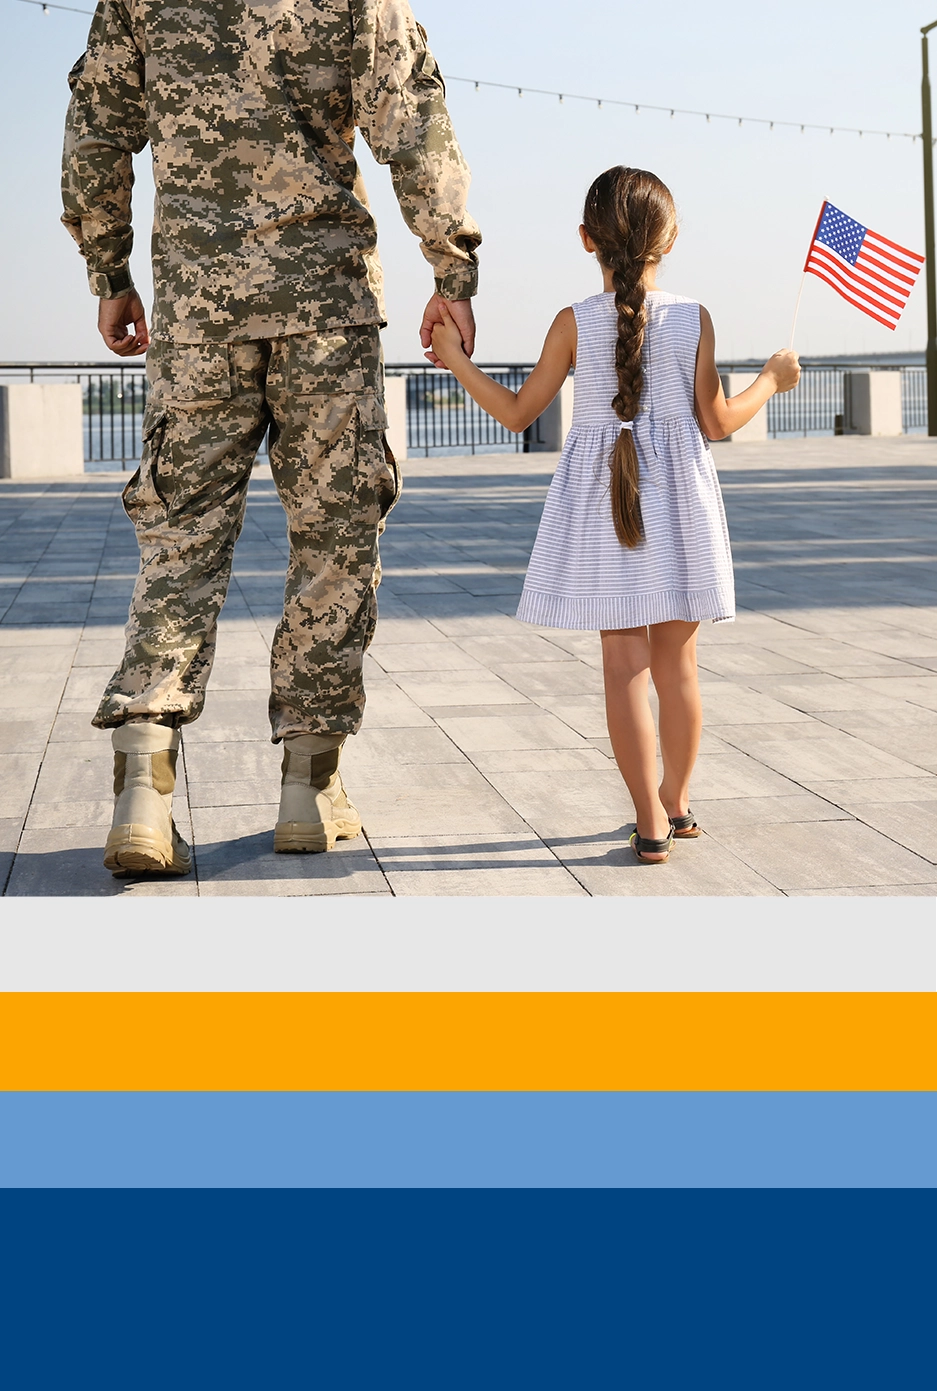 Military father holding hands with his young daughter, who clutches an American flag, exemplifies BTC's support for military veterans and their families